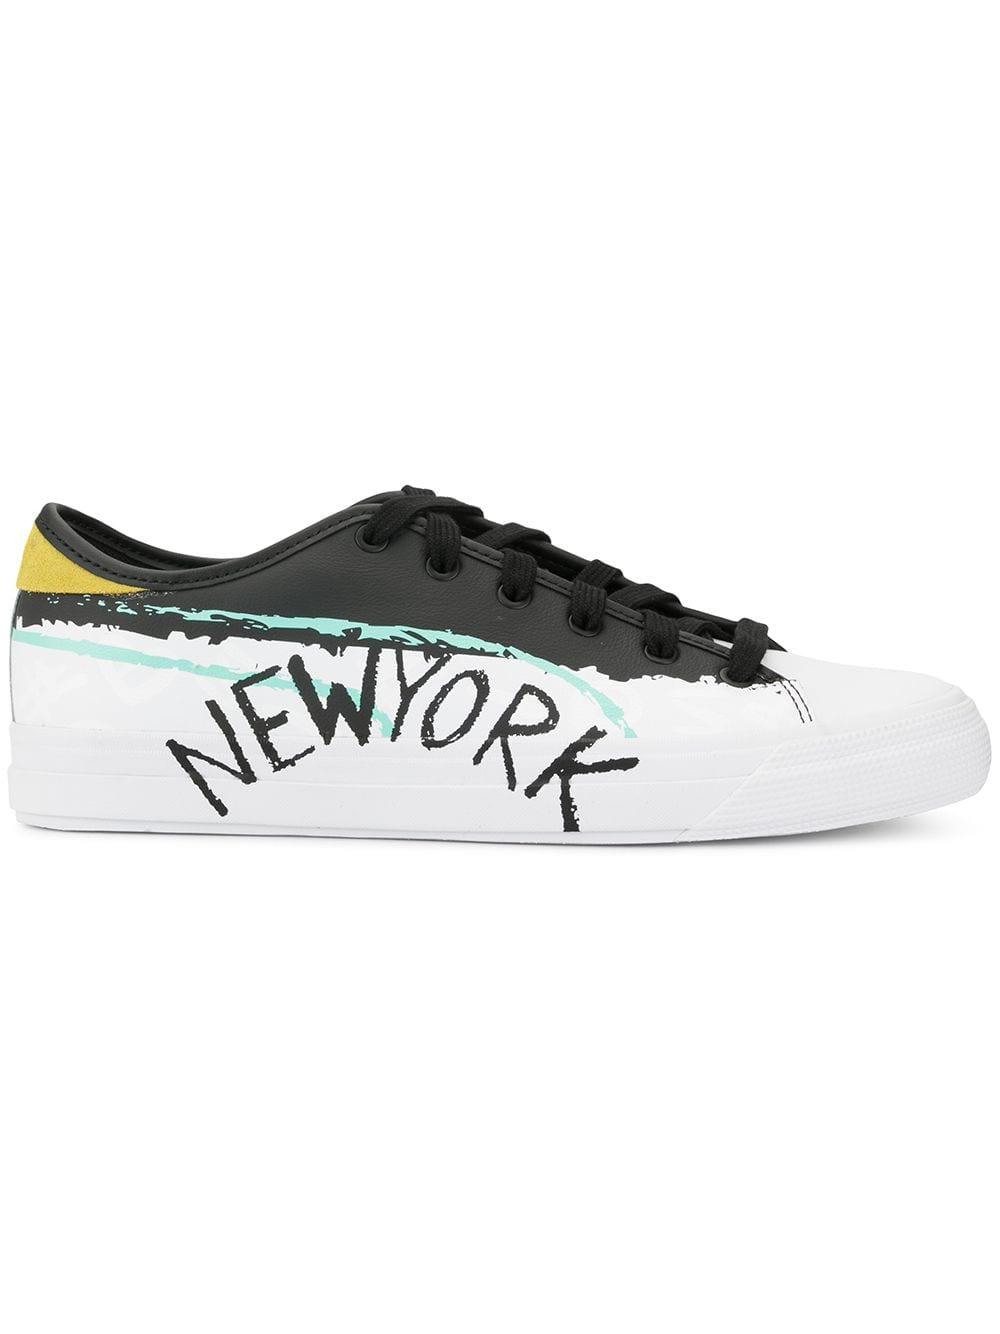 PUMA Leather New York Print Sneakers in 